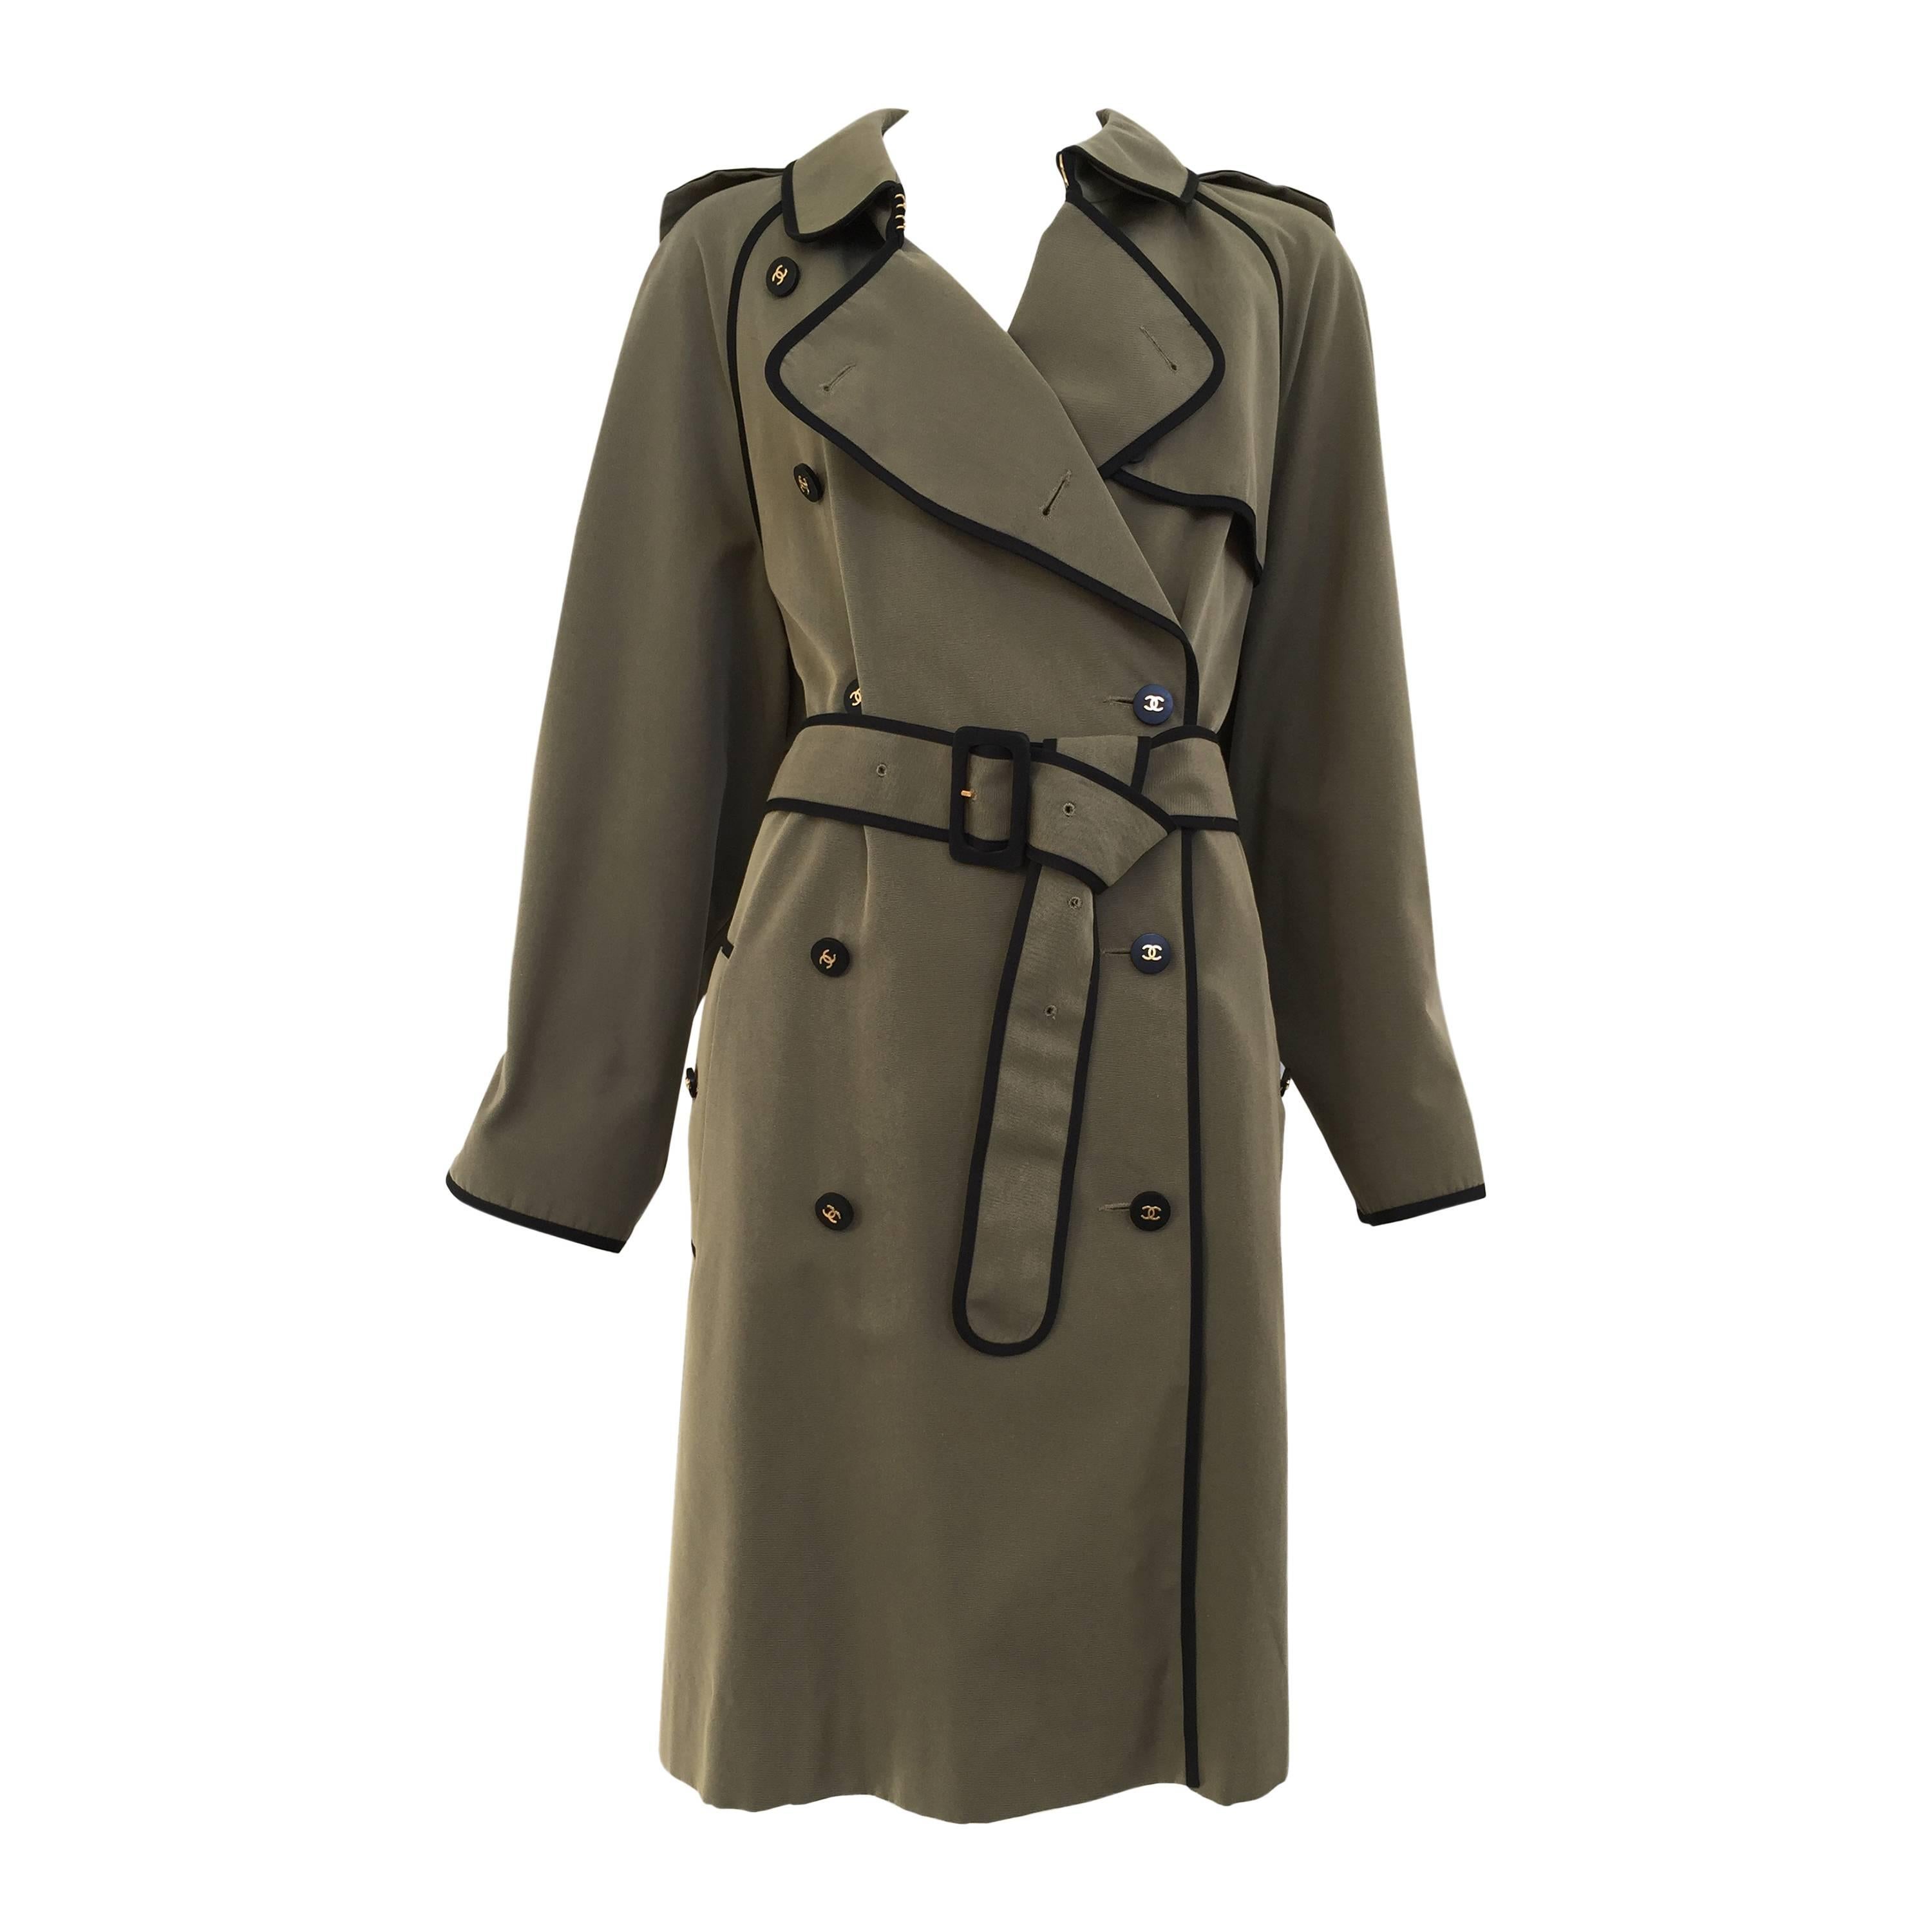 1980s CHANEL olive green cotton trench coat